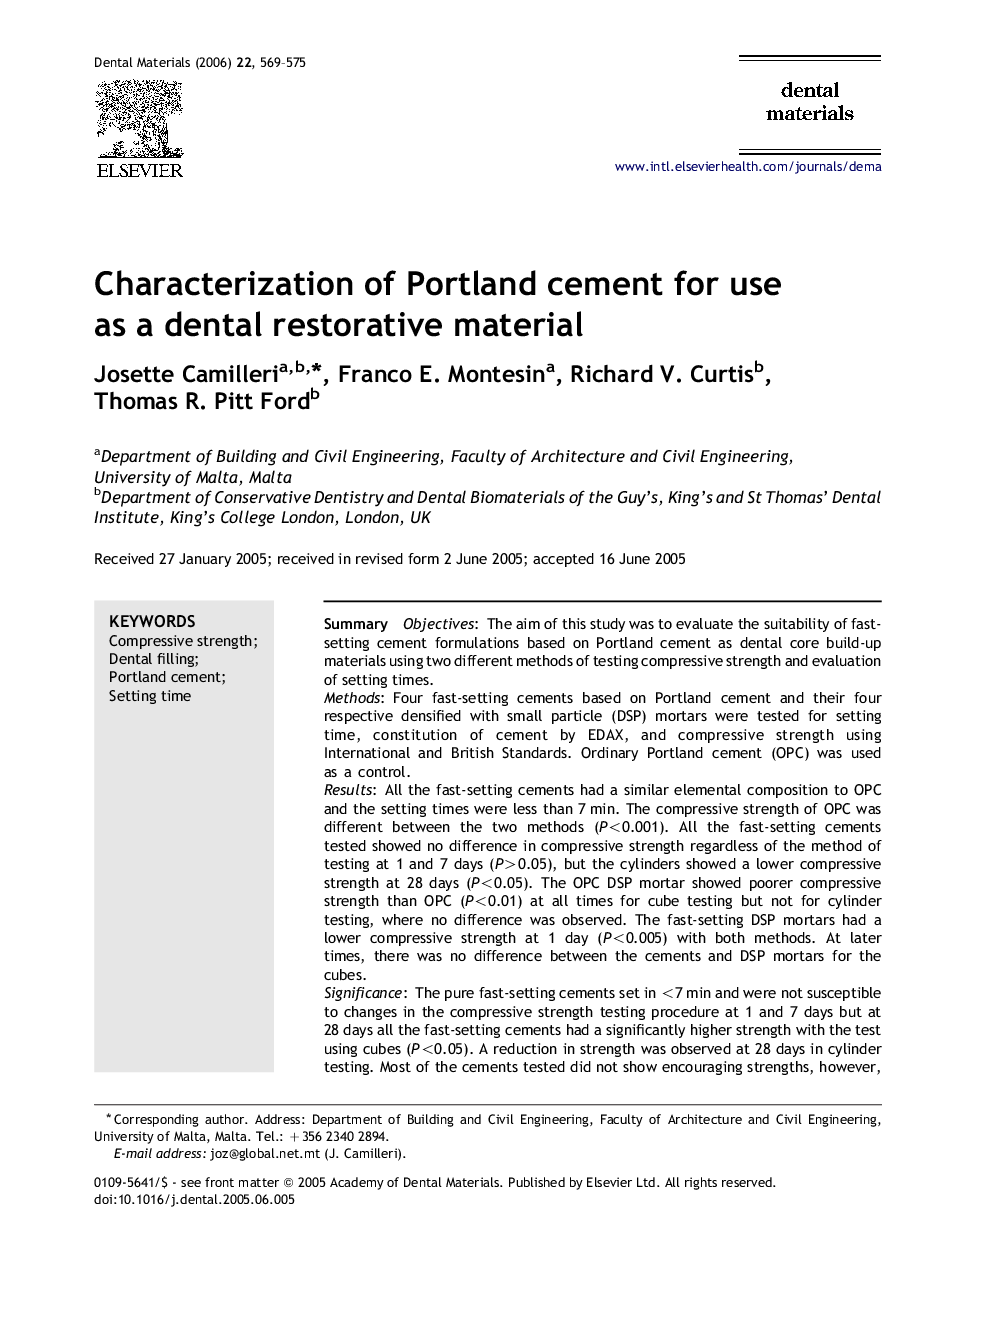 Characterization of Portland cement for use as a dental restorative material